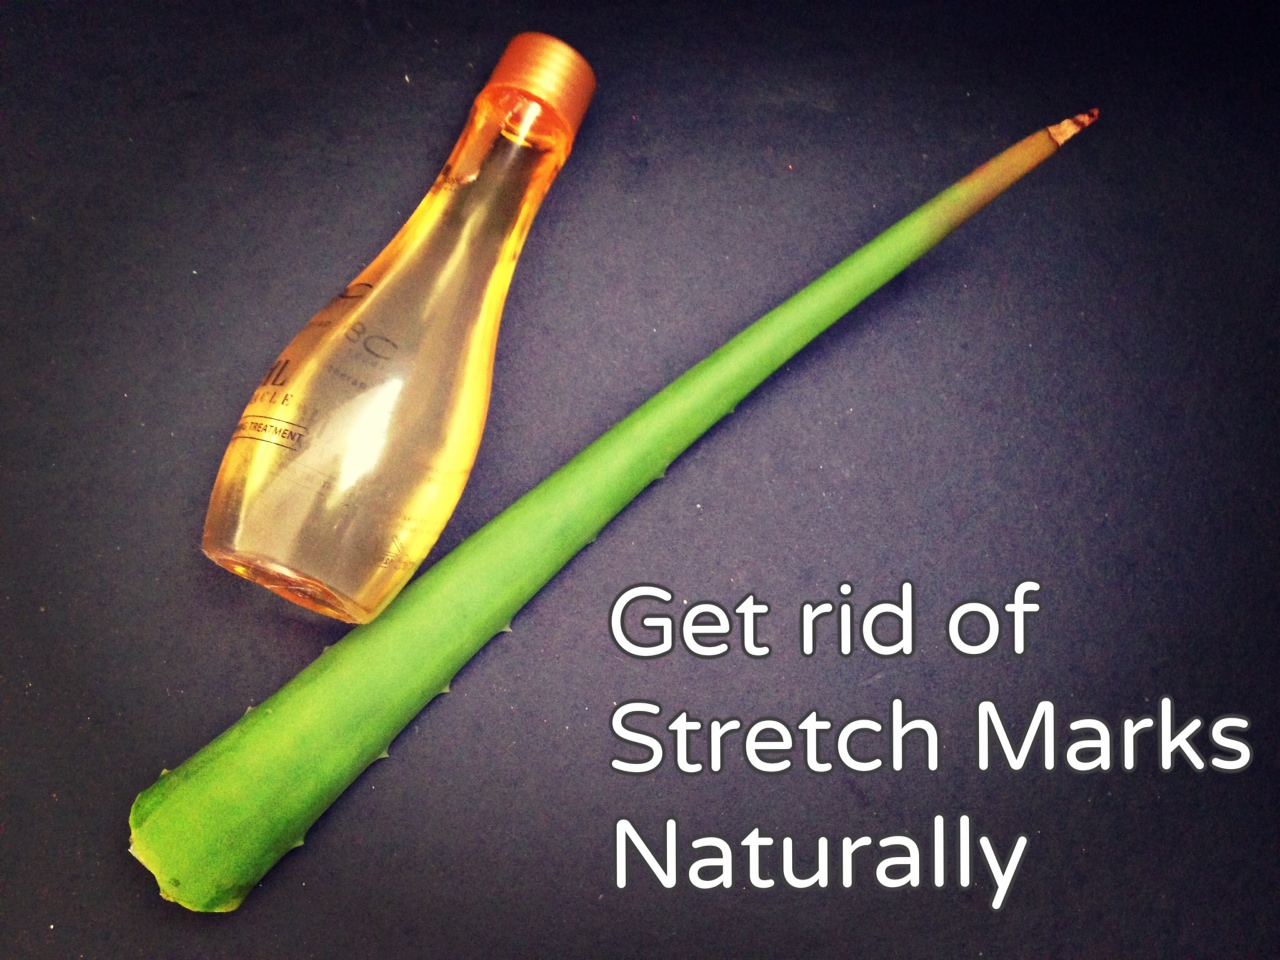 How to Get Rid Of Stretch Marks Naturally?